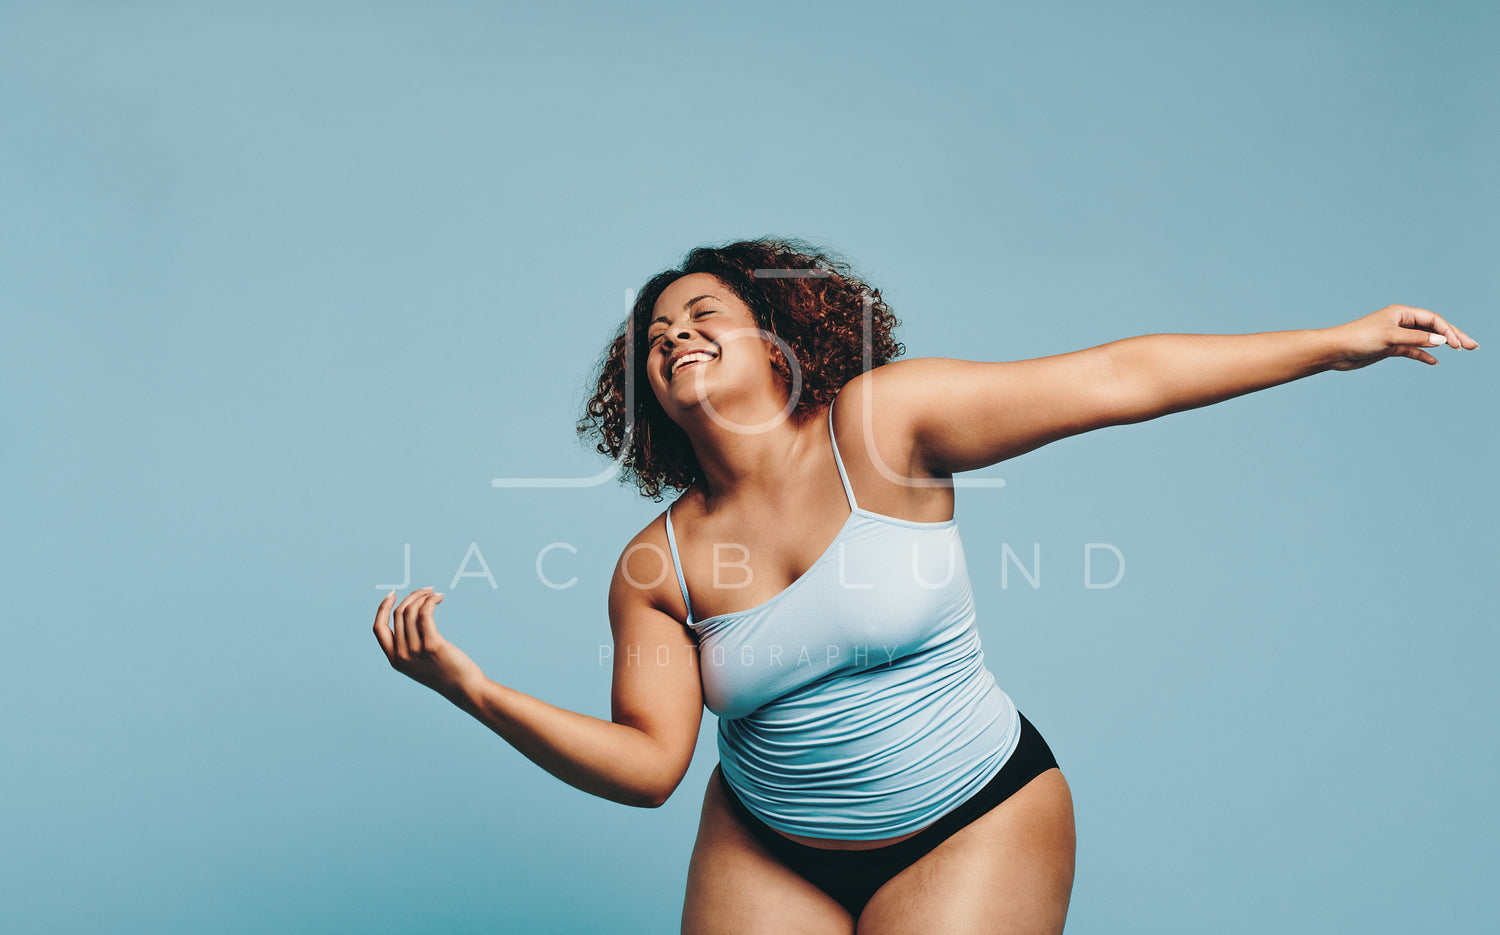 Athletic plus size woman dancing in a studio, expressing body positivi –  Jacob Lund Photography Store- premium stock photo